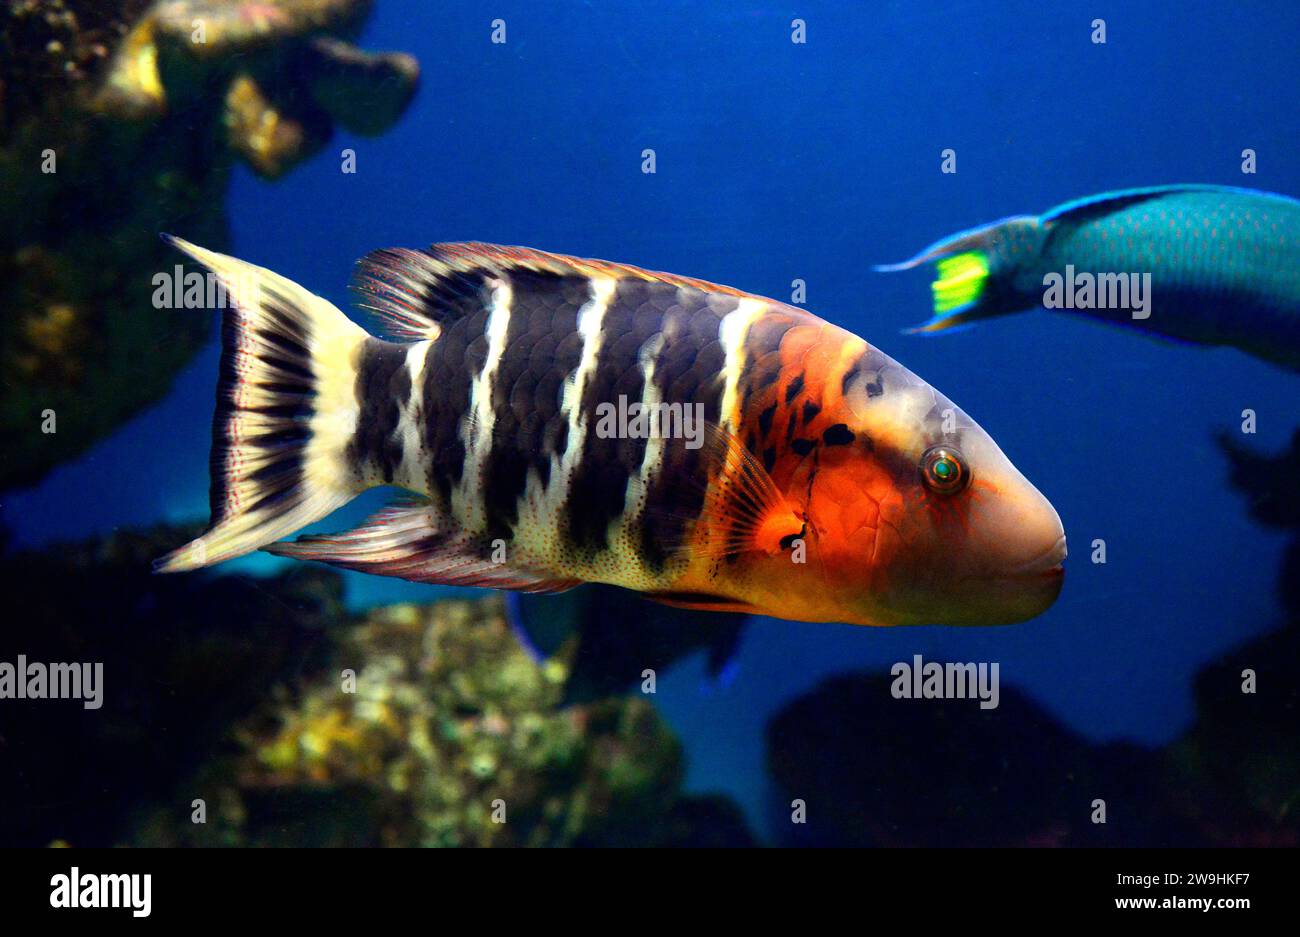 Red-breasted wrasse (Cheilinus fasciatus) is a marine fish native to tropical Indo-Pacific Ocean. Stock Photo